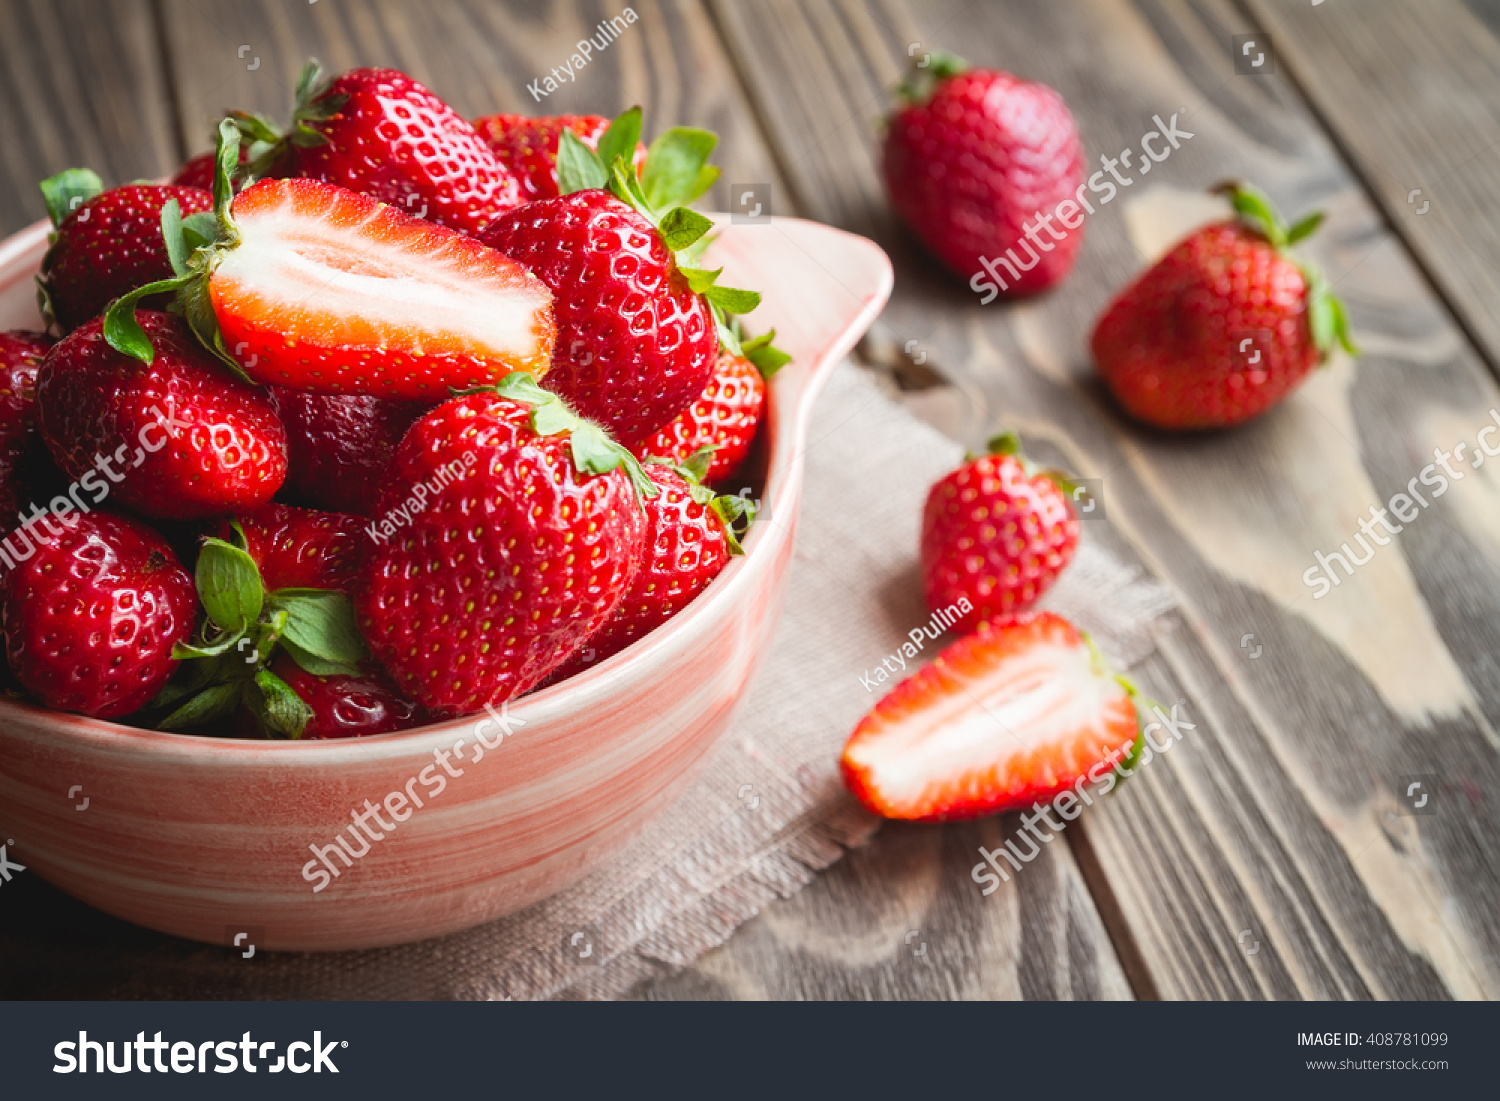 Fresh strawberries in a bowl on wooden table with low key scene. #408781099